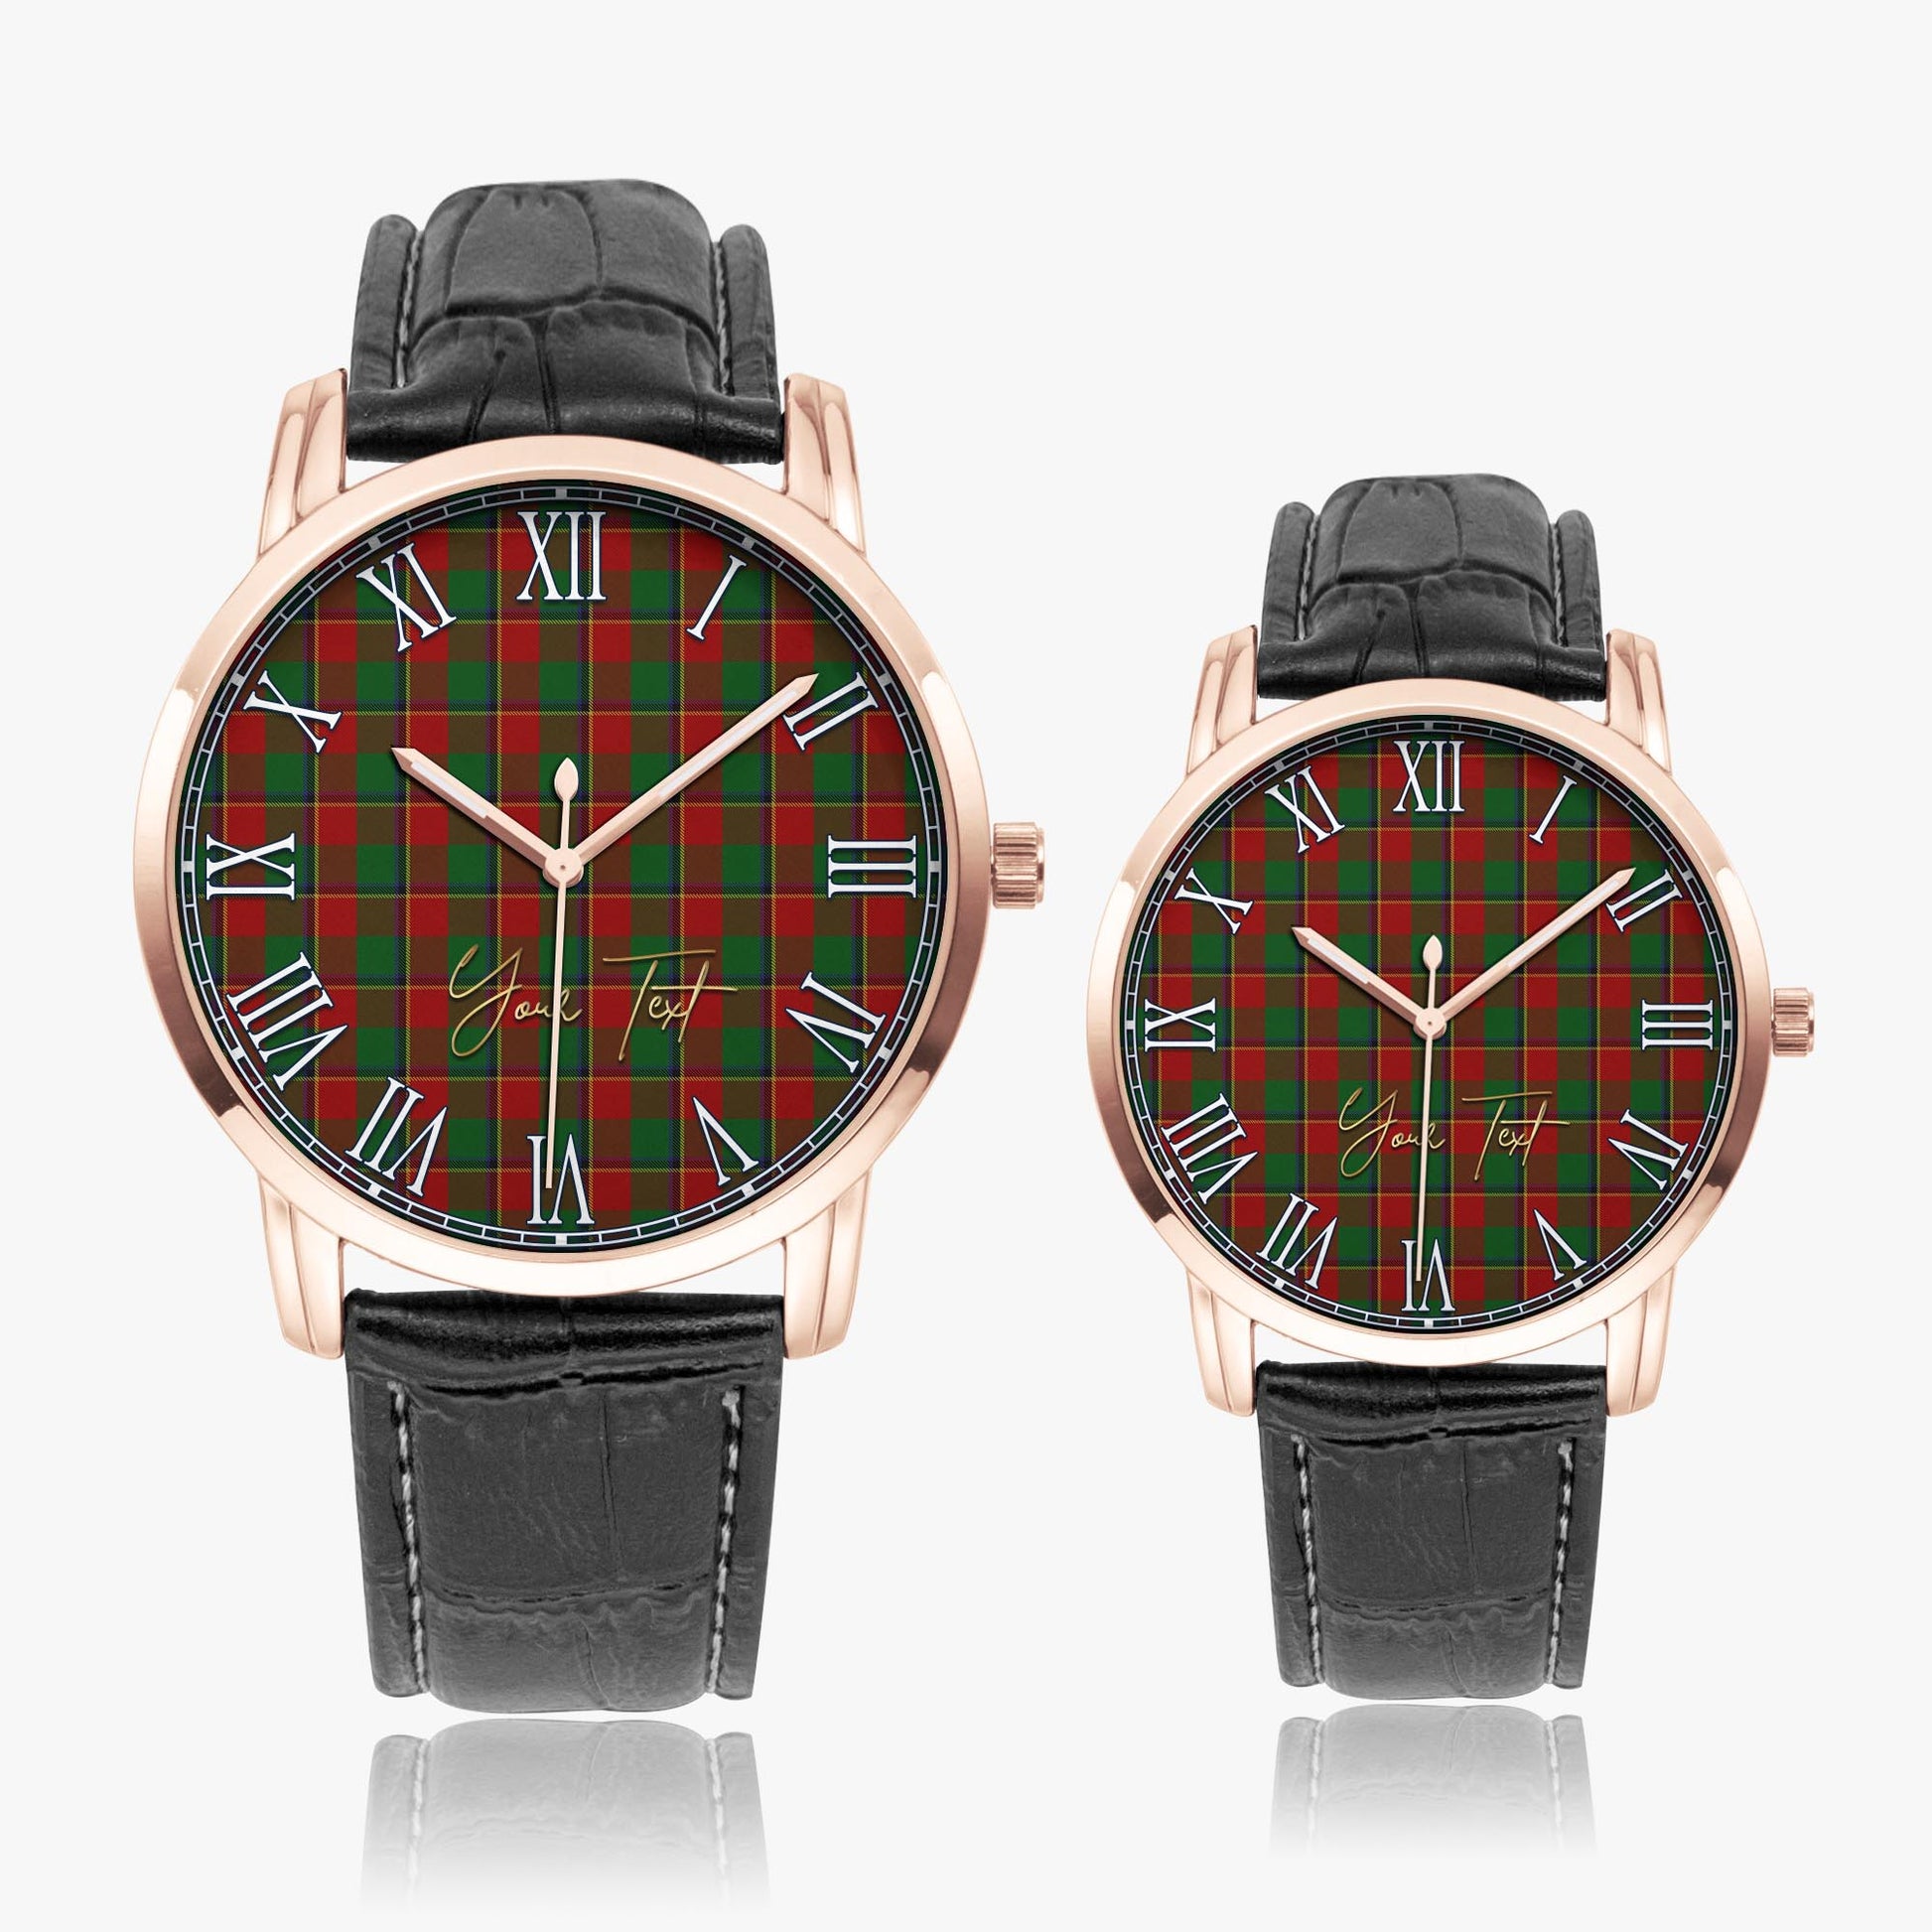 Turnbull Dress Tartan Personalized Your Text Leather Trap Quartz Watch Wide Type Rose Gold Case With Black Leather Strap - Tartanvibesclothing Shop